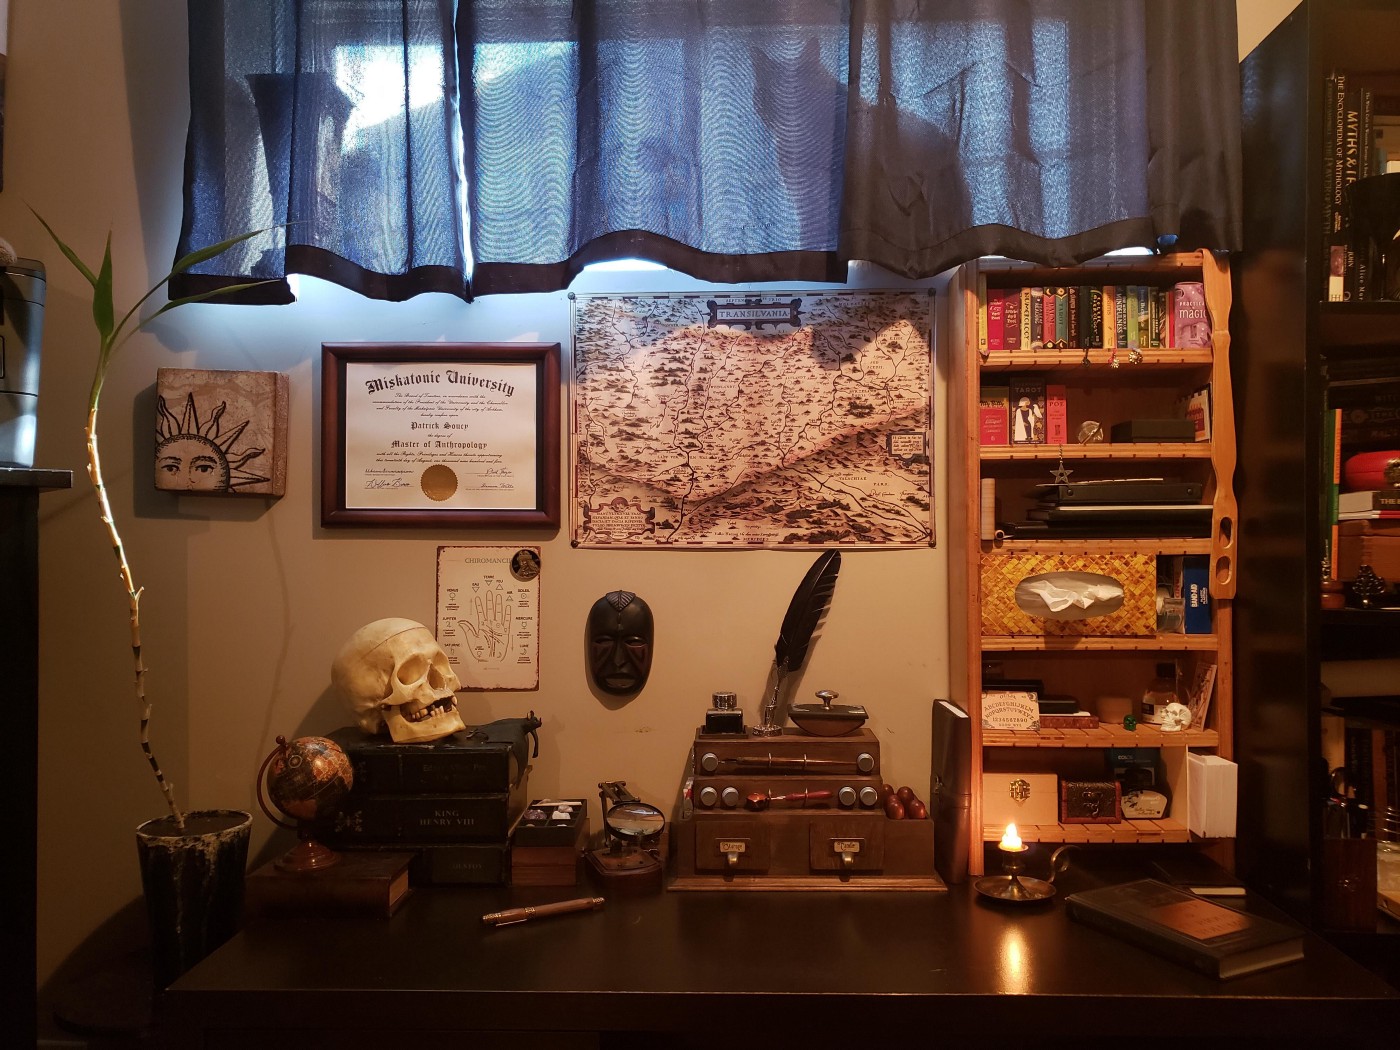 How To Decorate Your Room: Dark Academia Style.